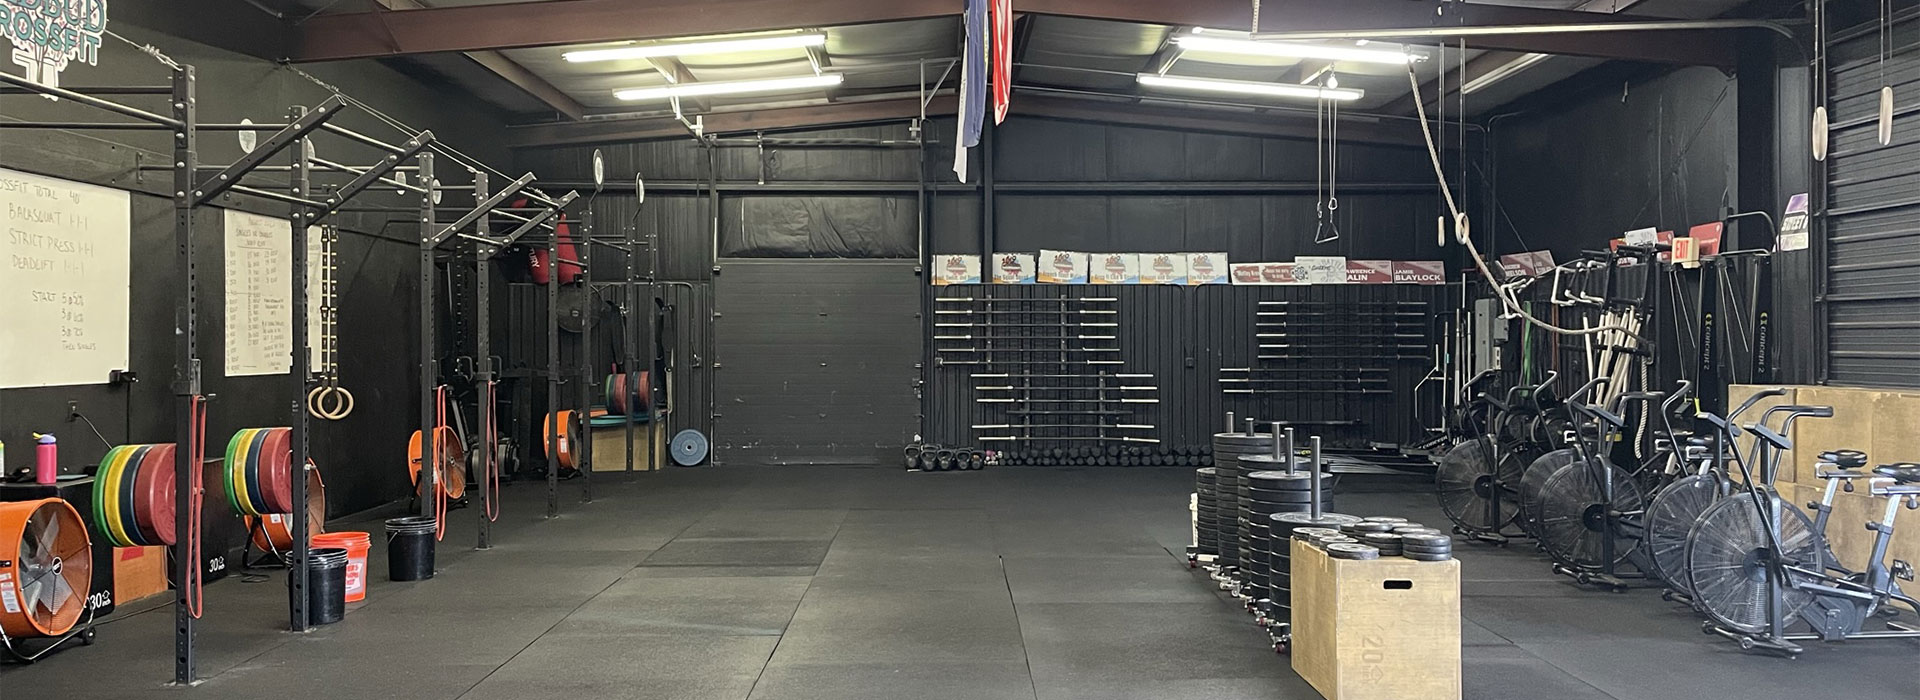 Why Redbud CrossFit Is Rank One Of The Best Gyms In Oklahoma City (okc)